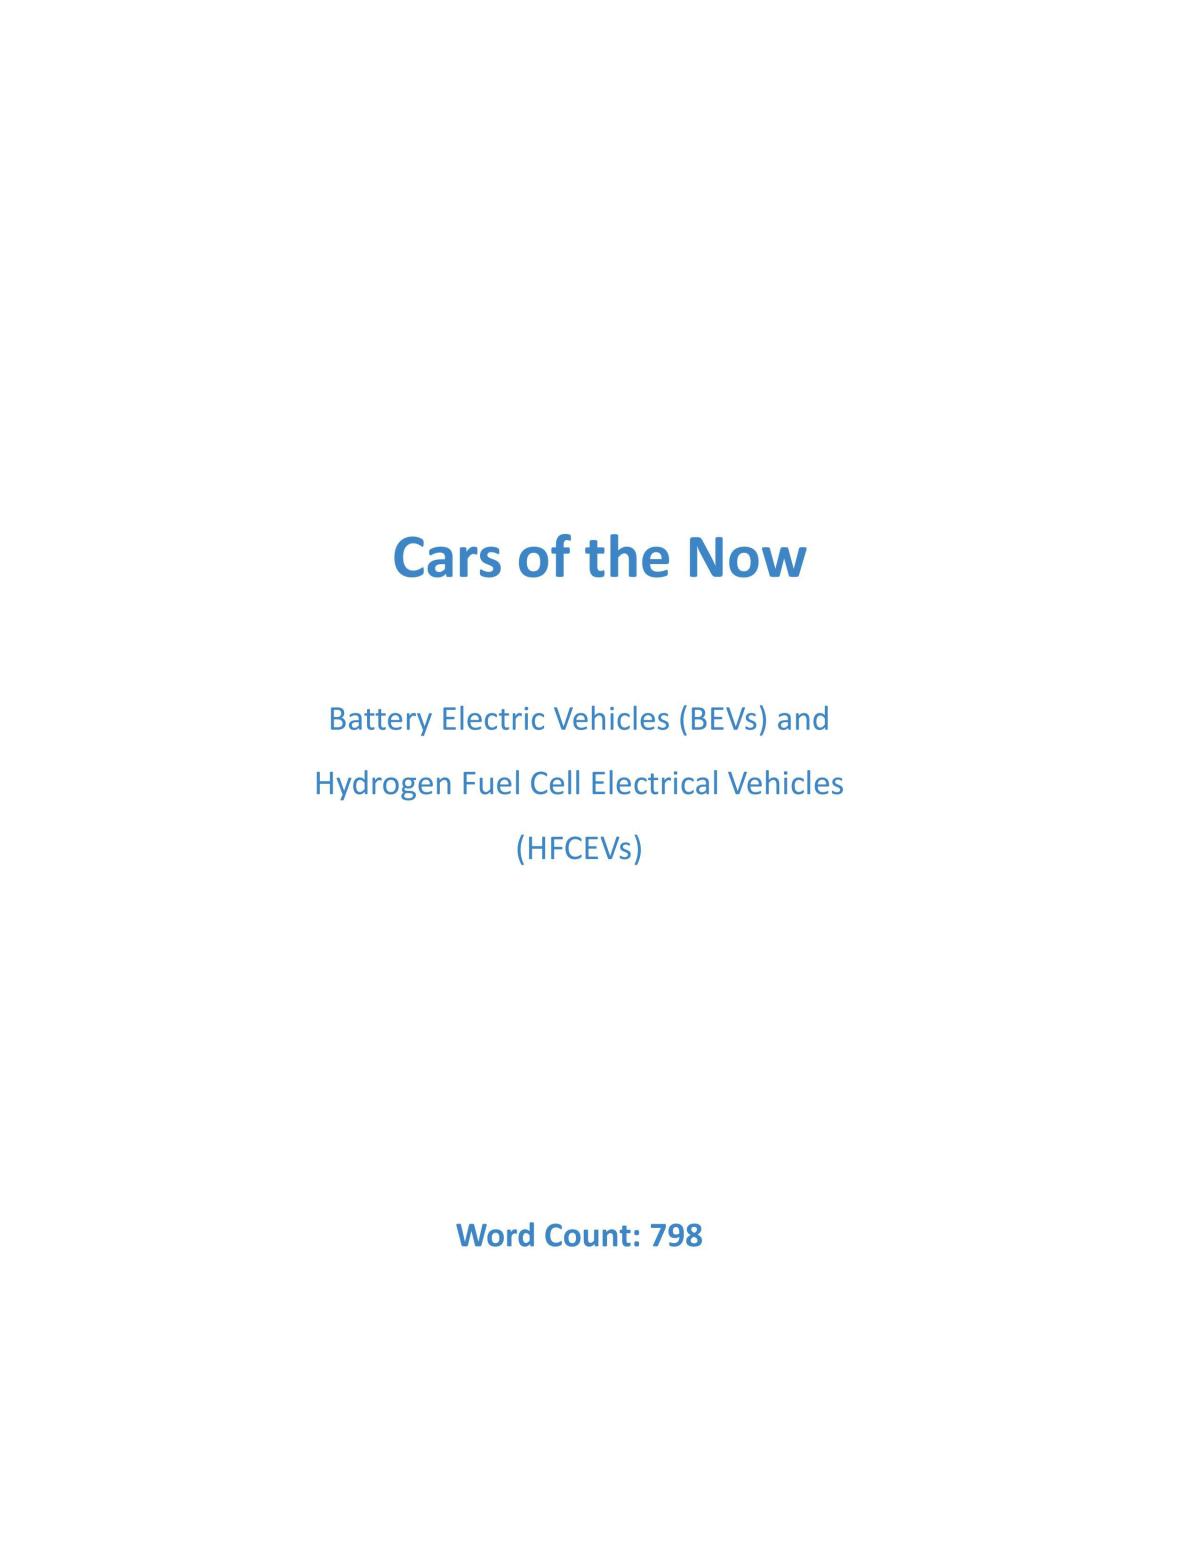 Battery Electric Vehicles and Hydrogen Fuel Cell Electric Vehicles  - Page 1